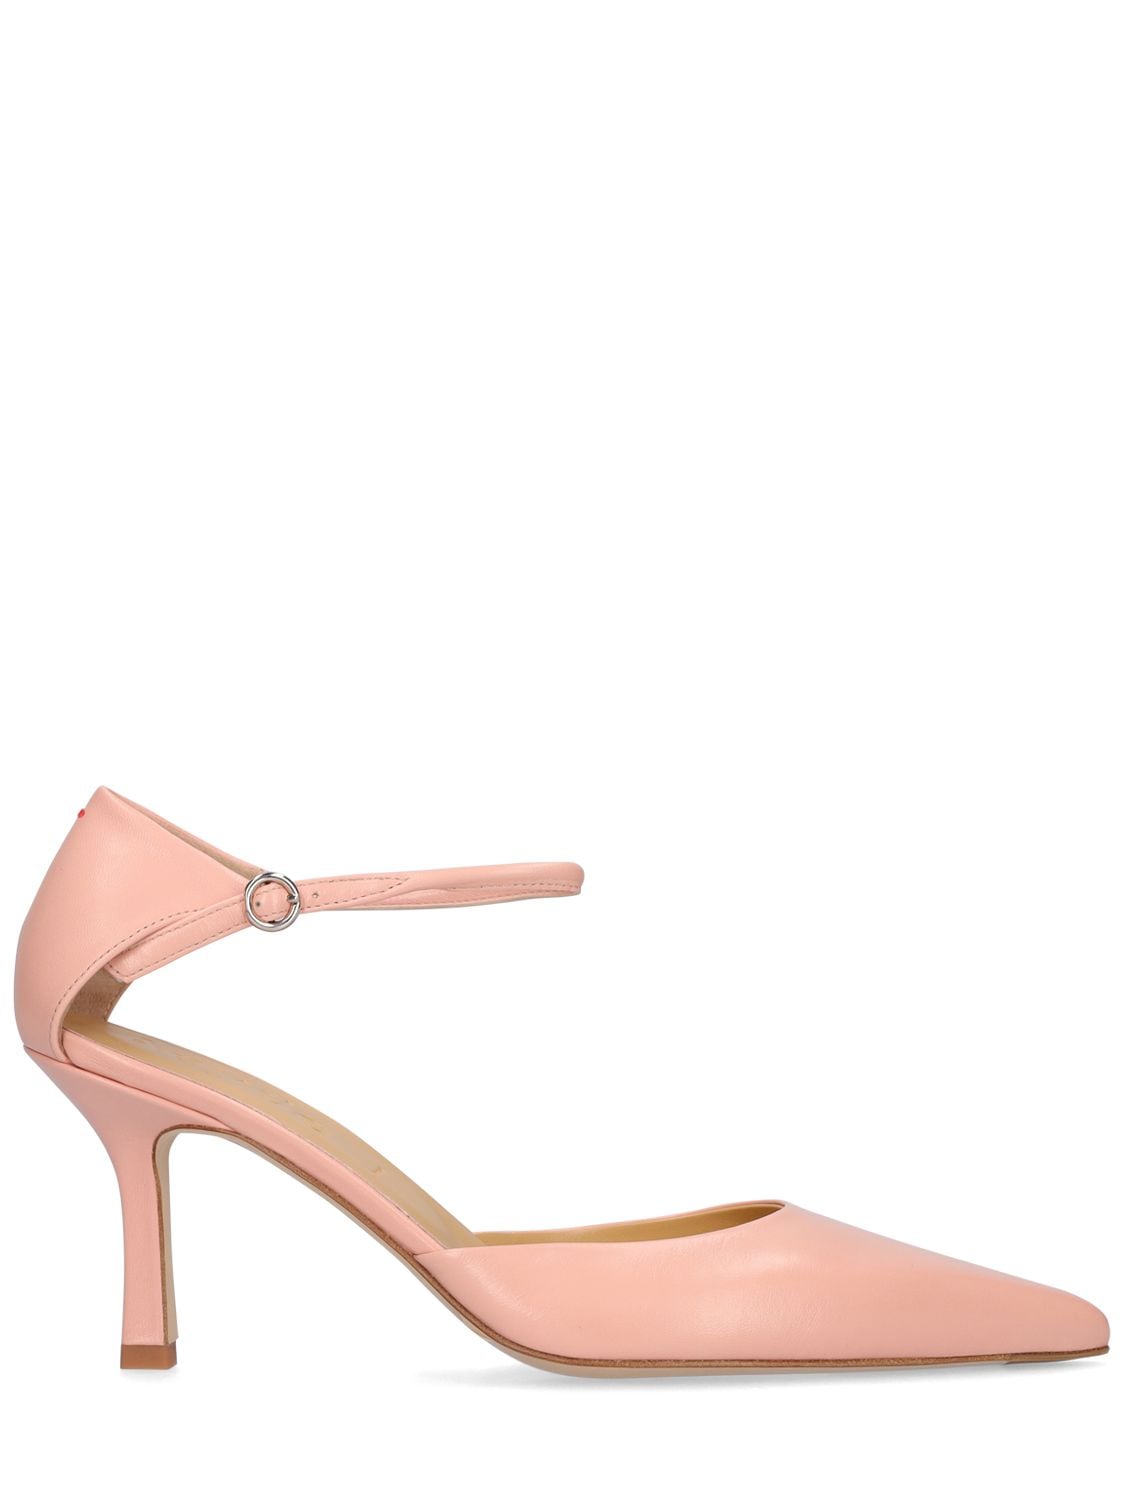 Aeyde 75mm Selma Leather Pumps In Blush